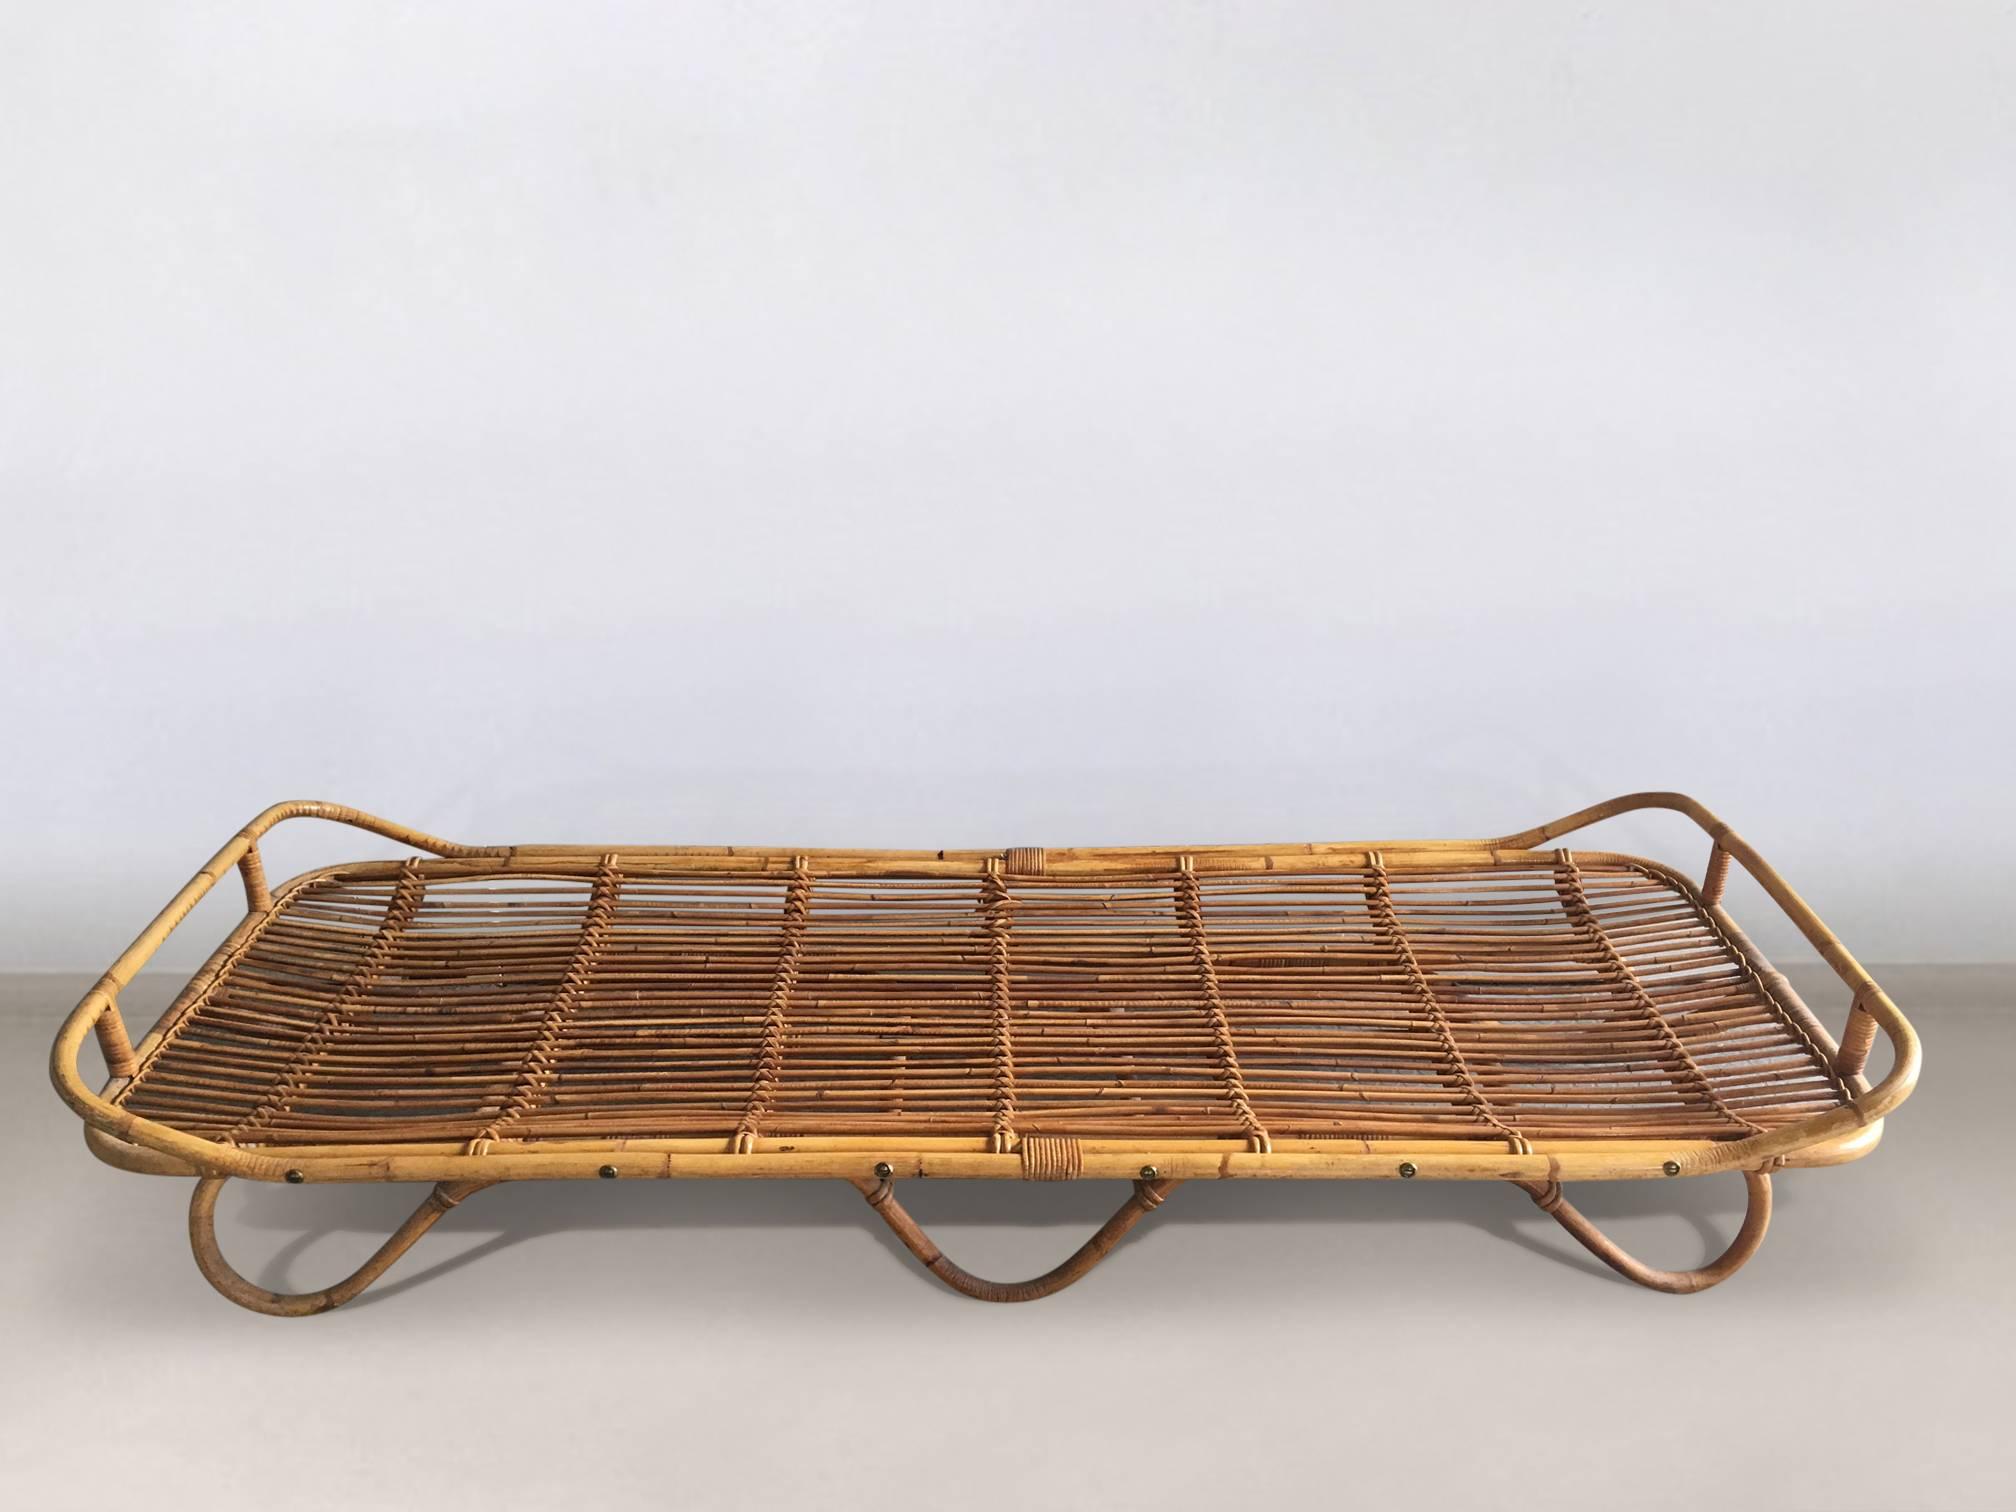 Midcentury Bohemian, Rattan Bed, Daybed, 1950s at 1stdibs